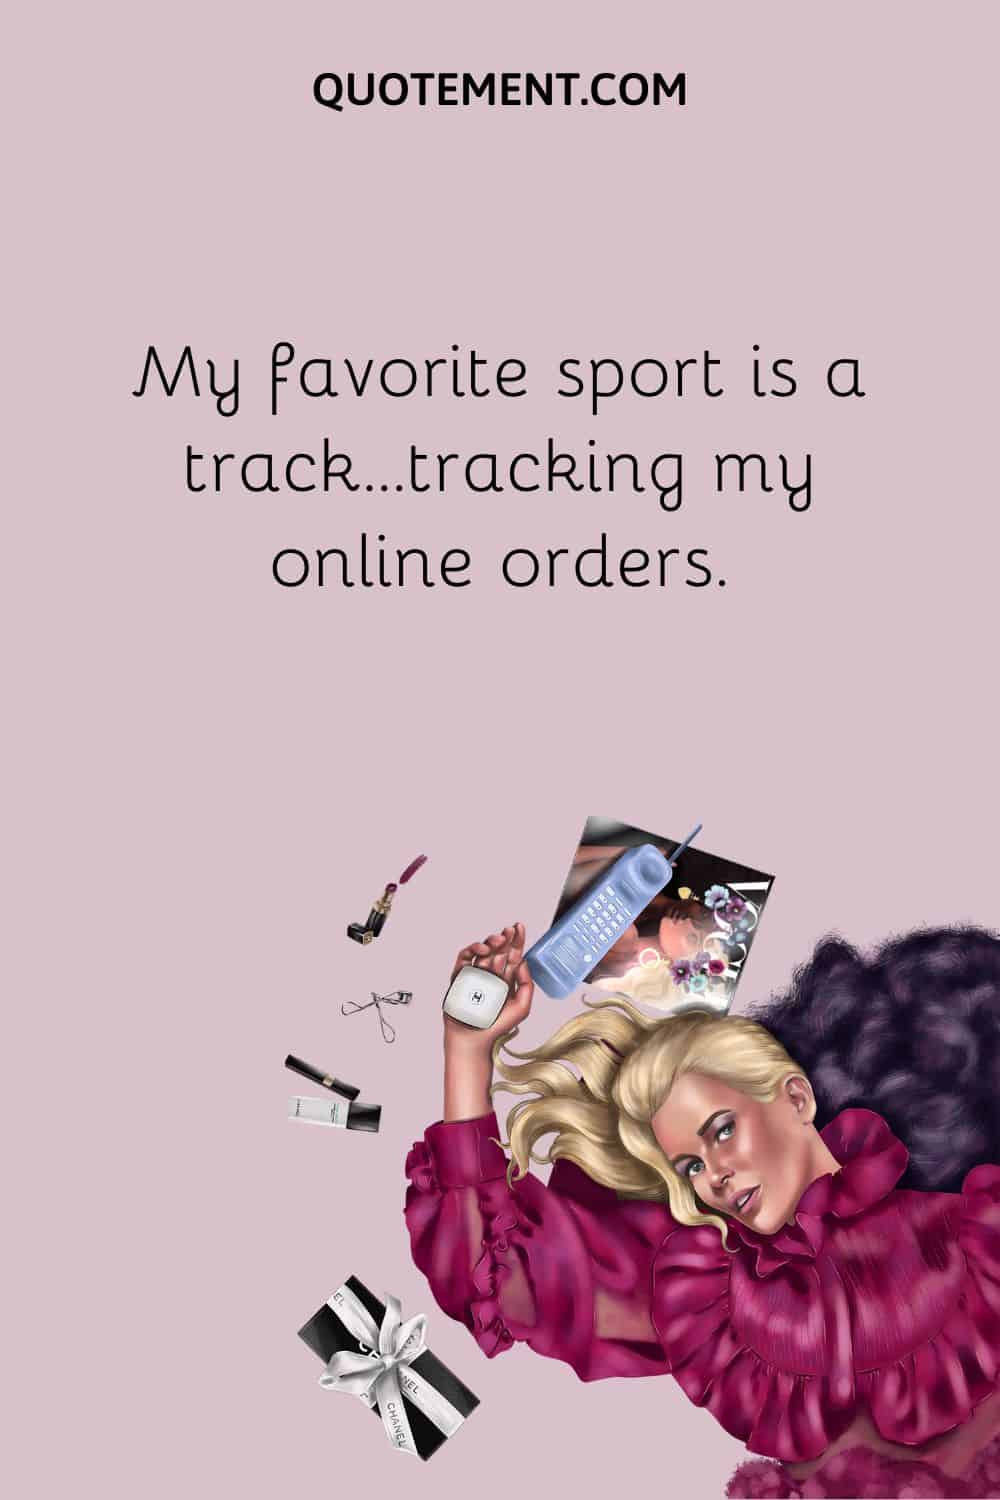 My favorite sport is a track